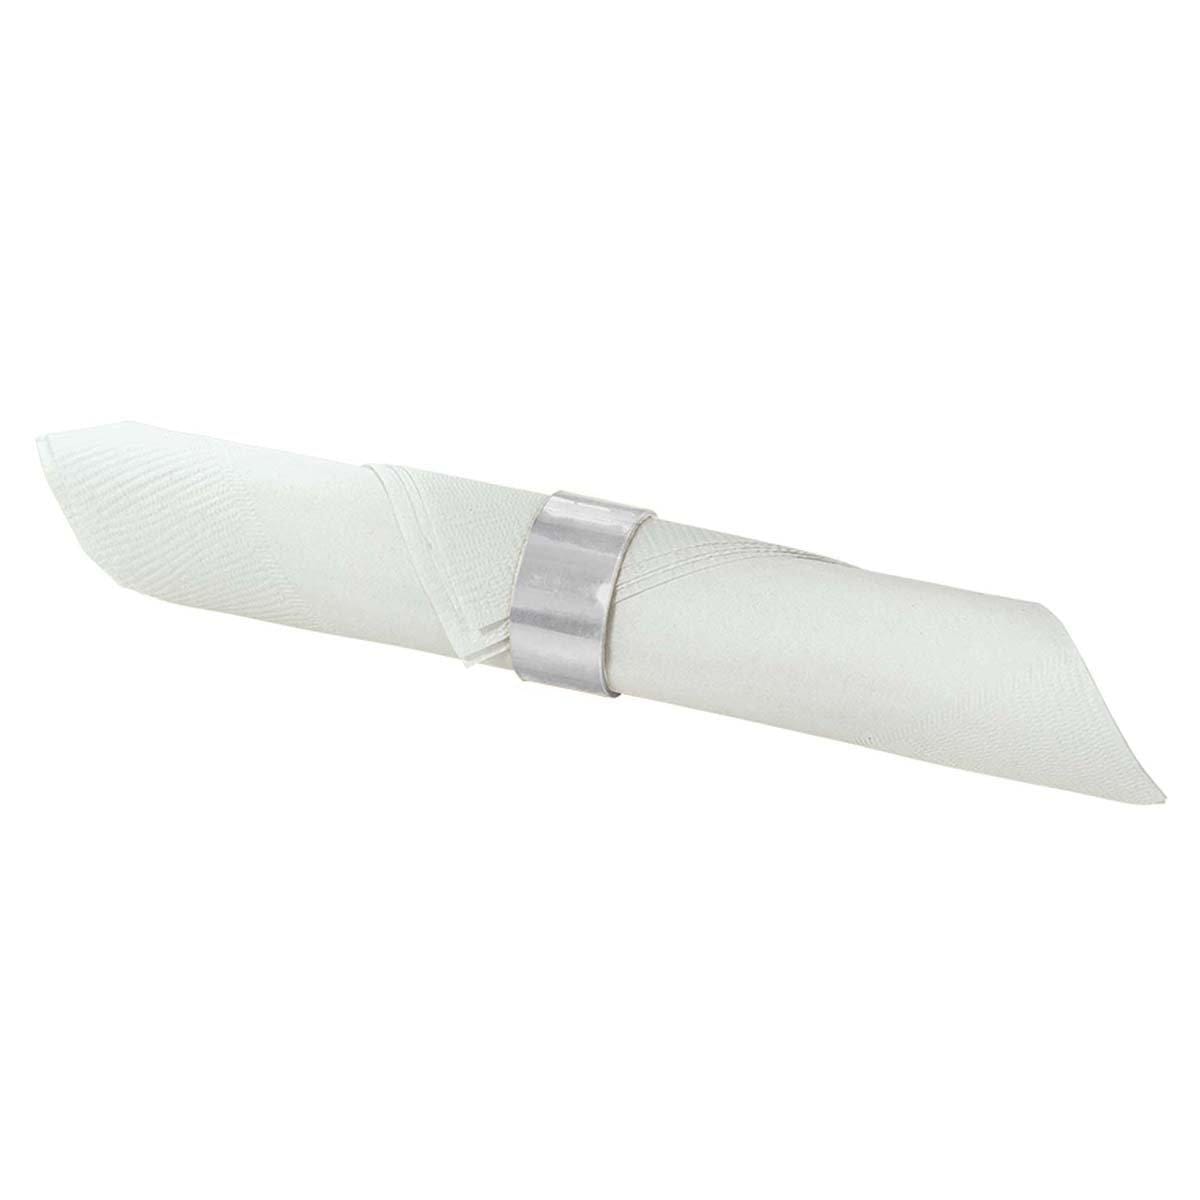 Buy Plasticware Napkin Rings - Silver 8/pkg. sold at Party Expert